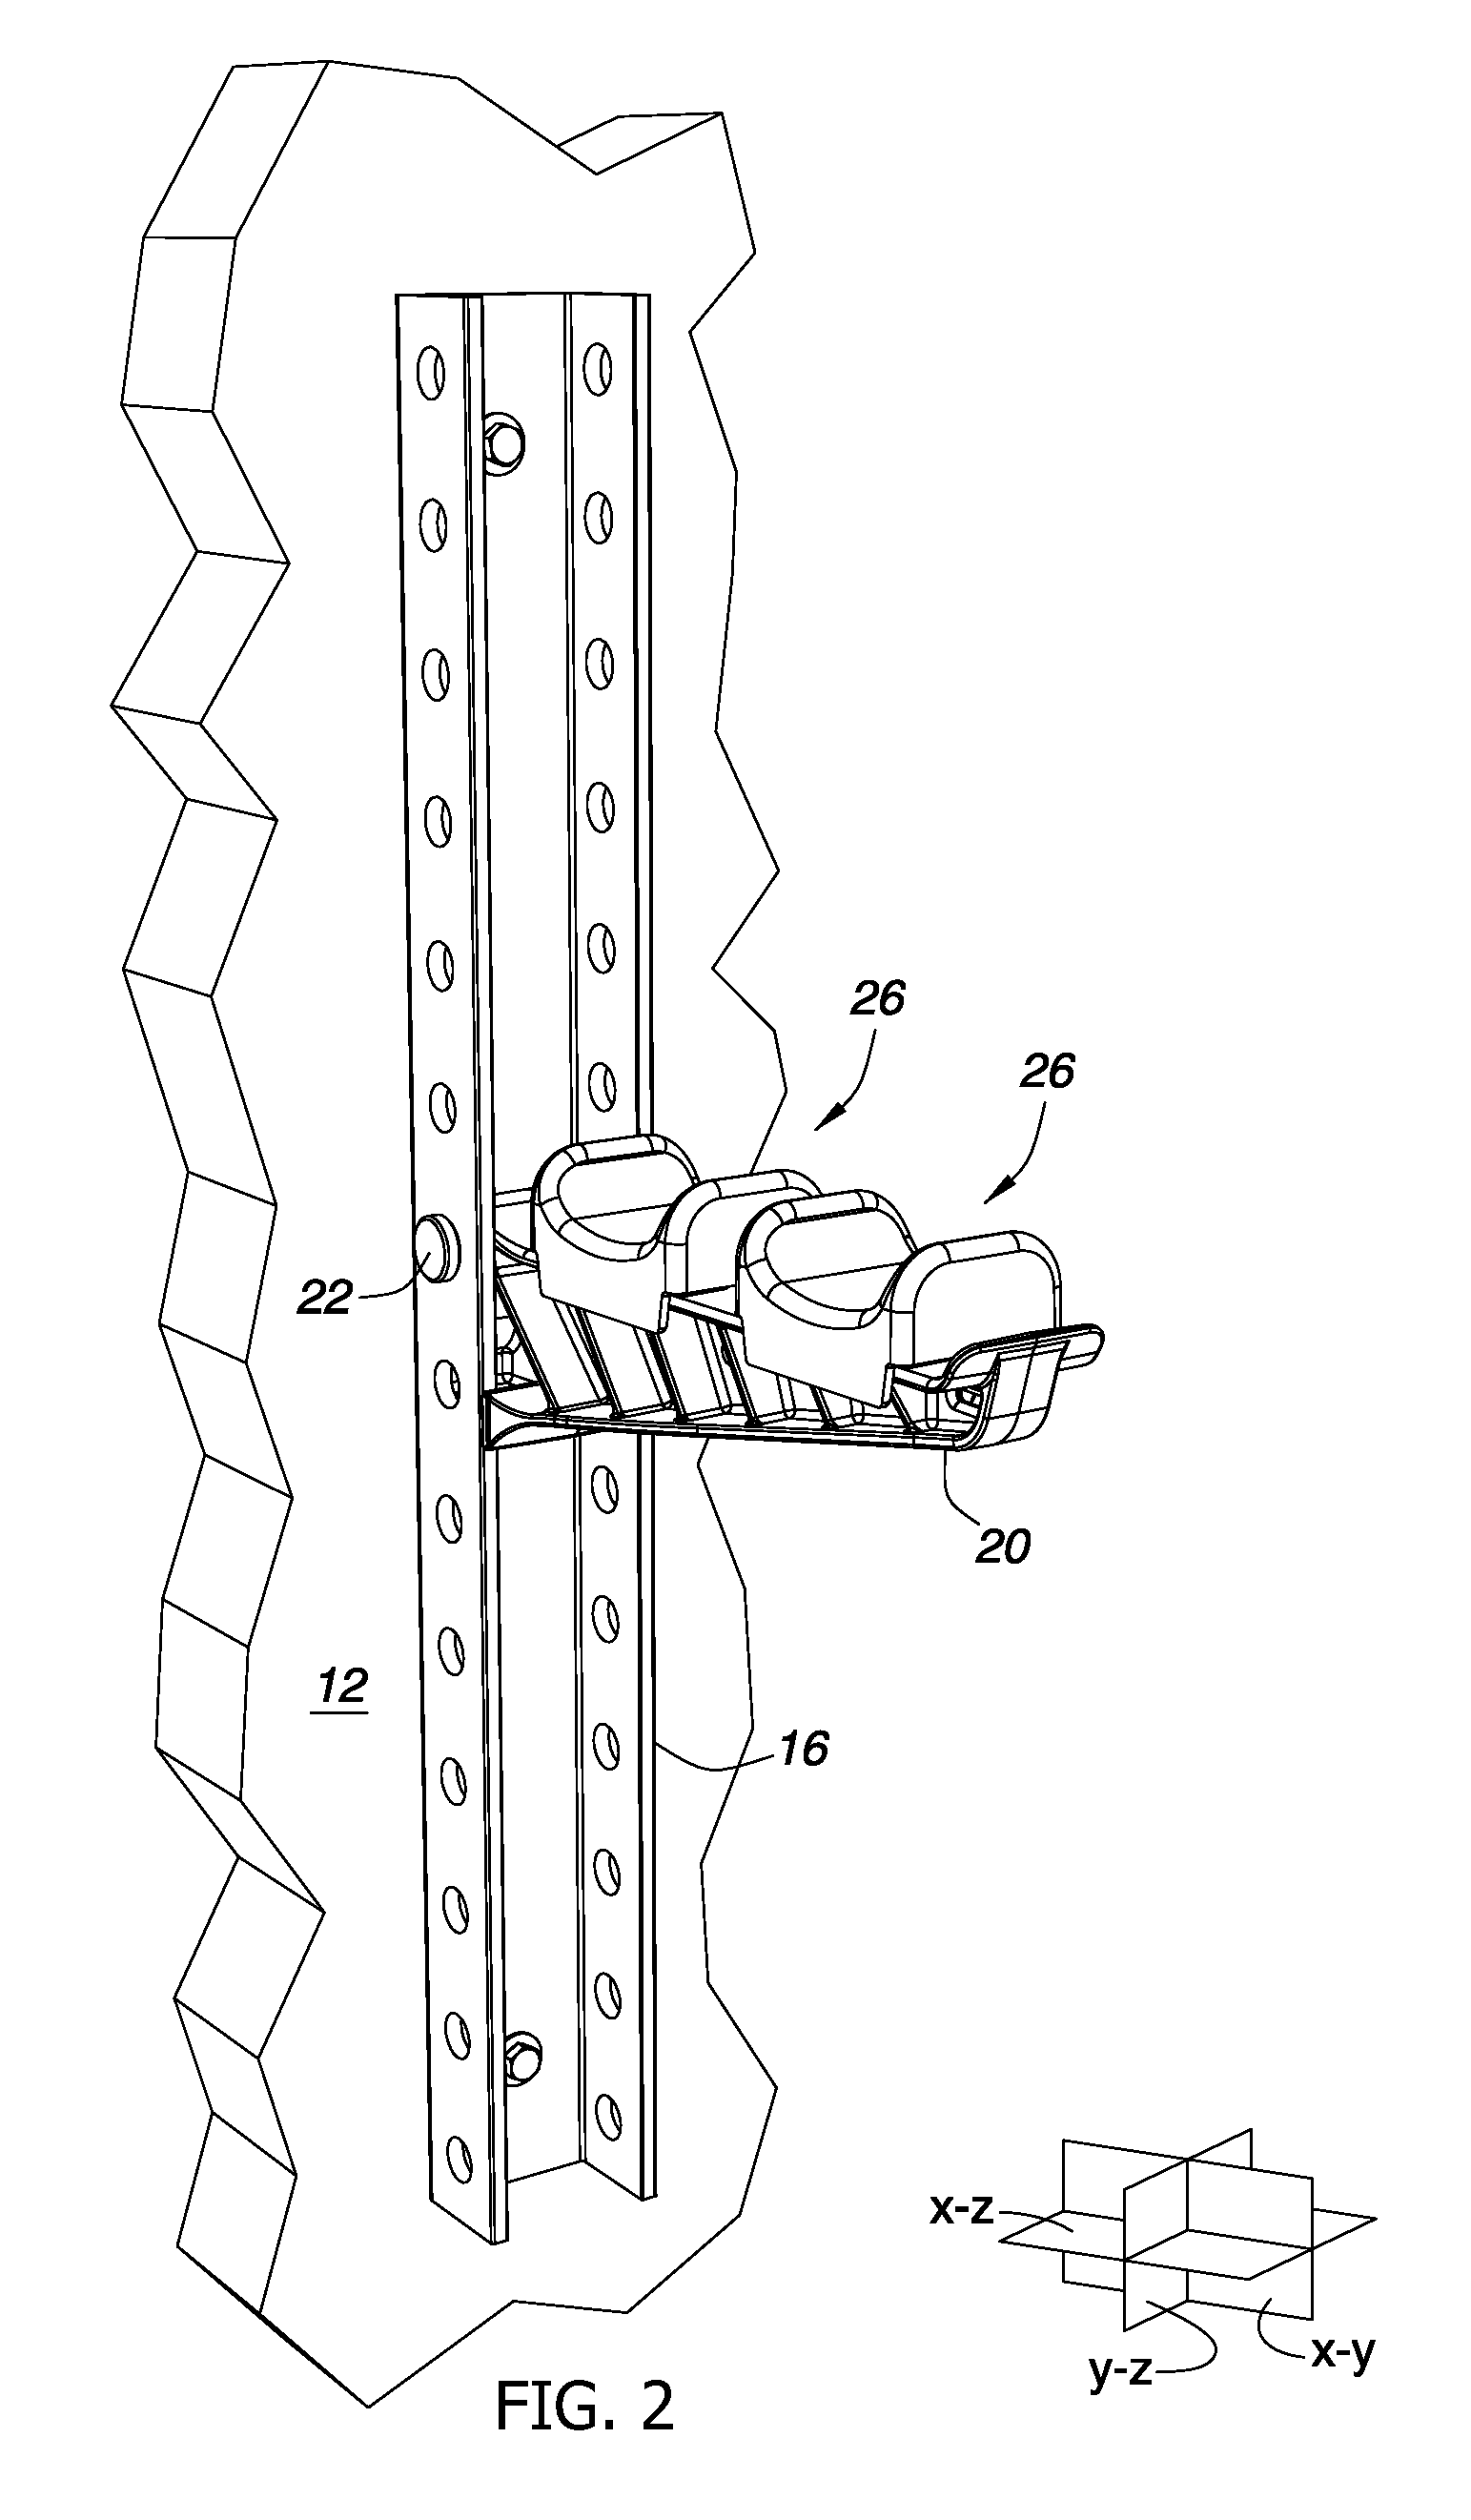 ULT cable support system with saddles